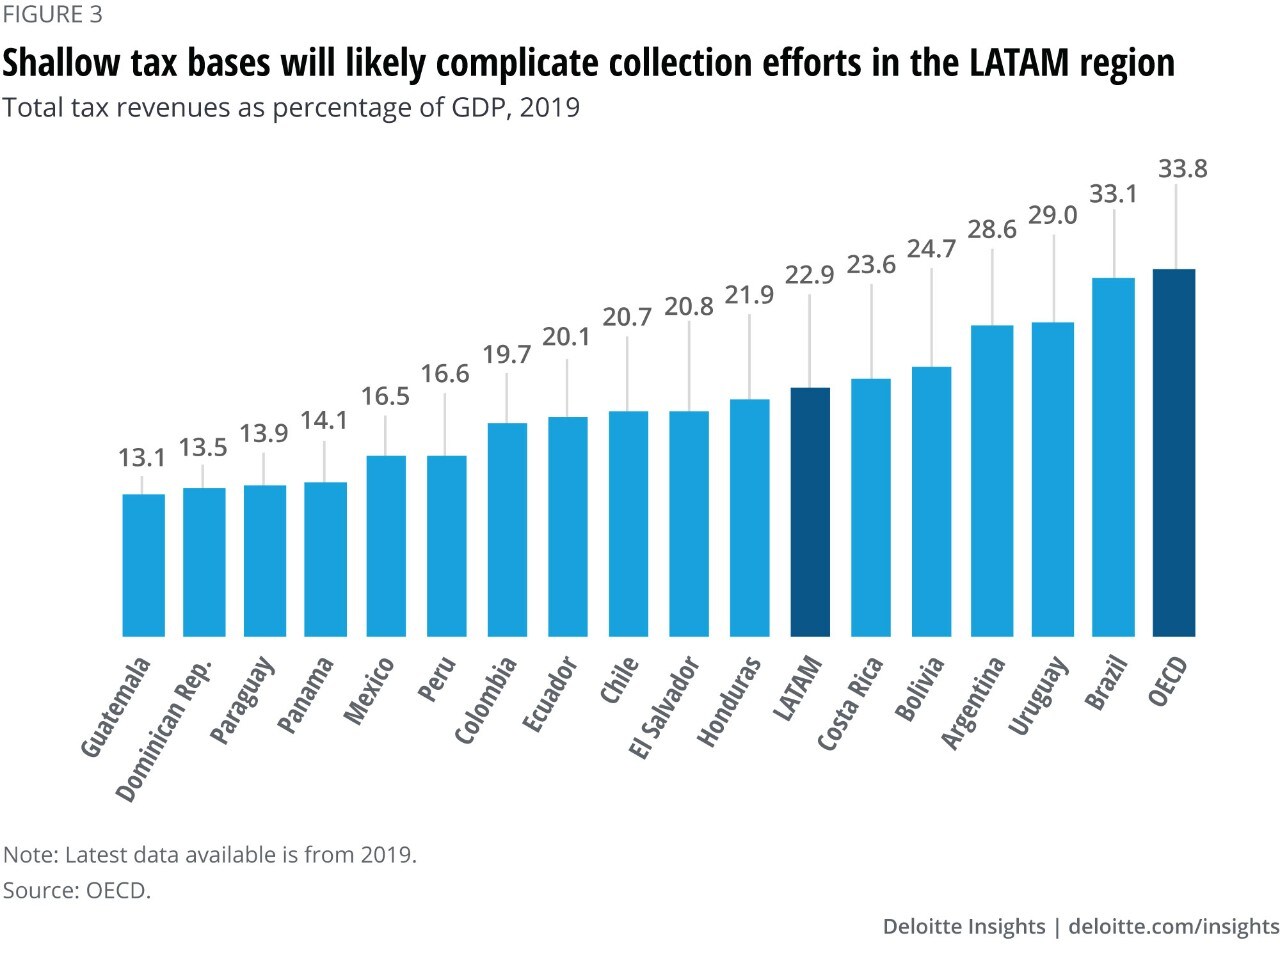 FIGURE 3. Shallow tax bases will likely complicate collection efforts in the LATAM region